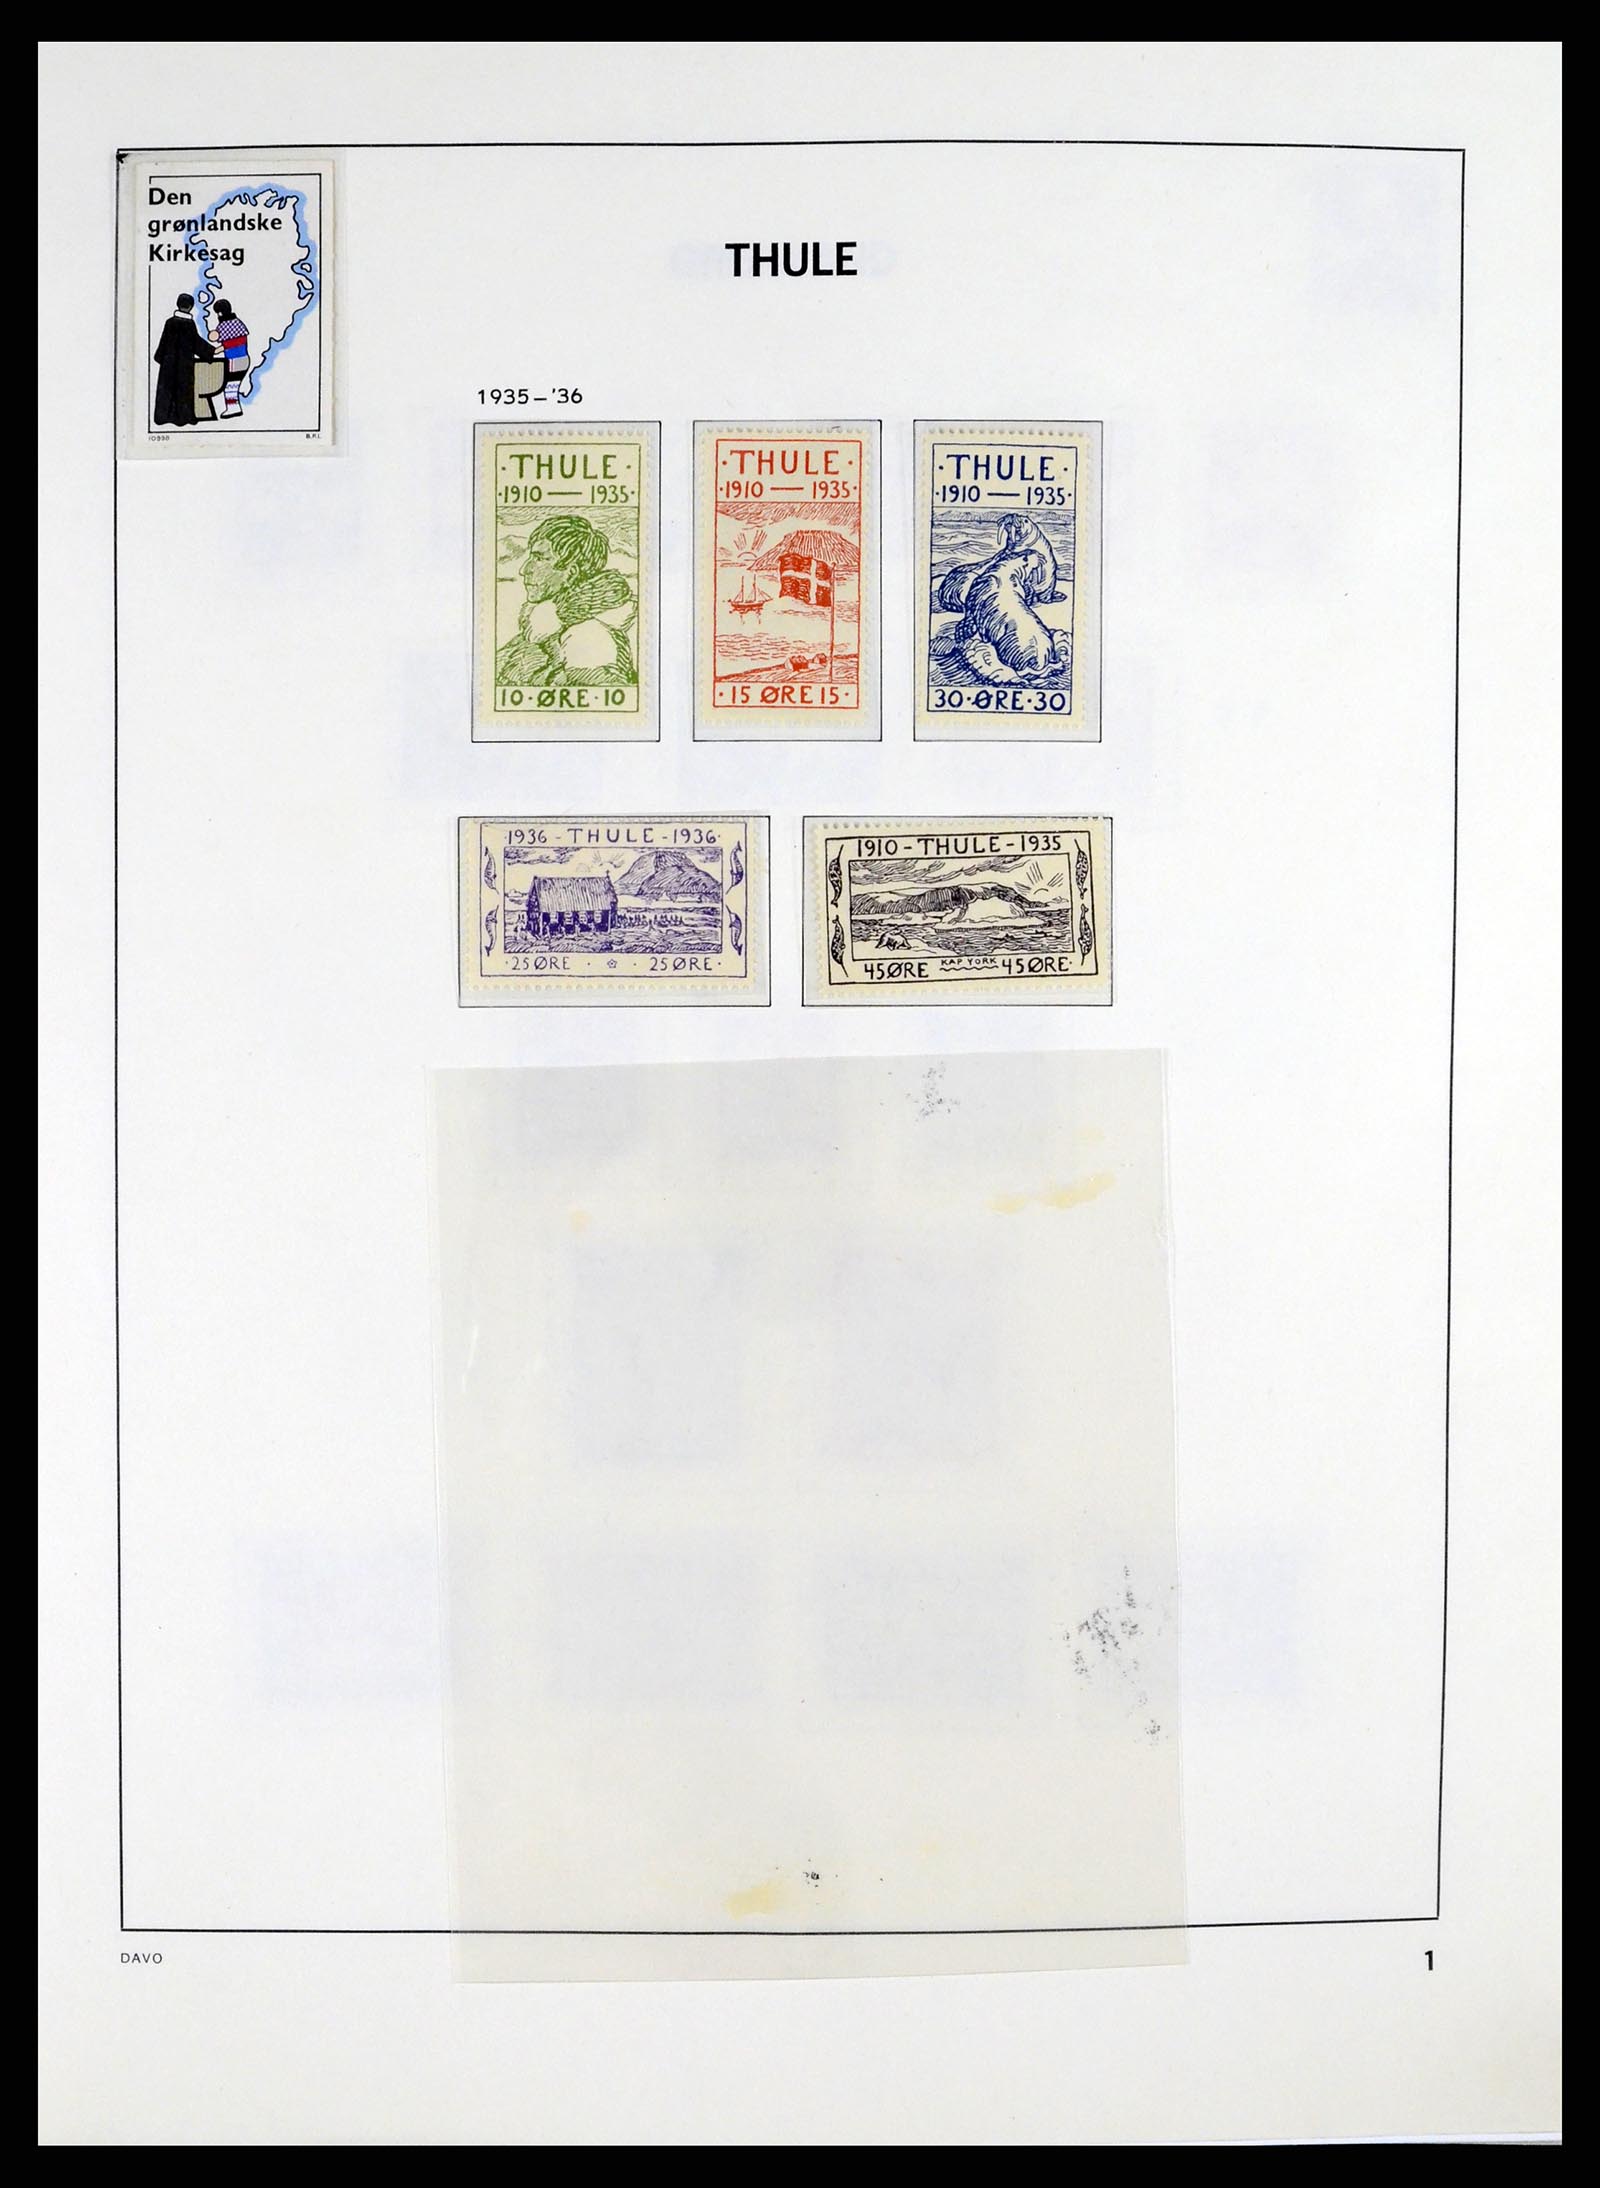 37315 001 - Stamp collection 37315 Greenland 1938-2020!